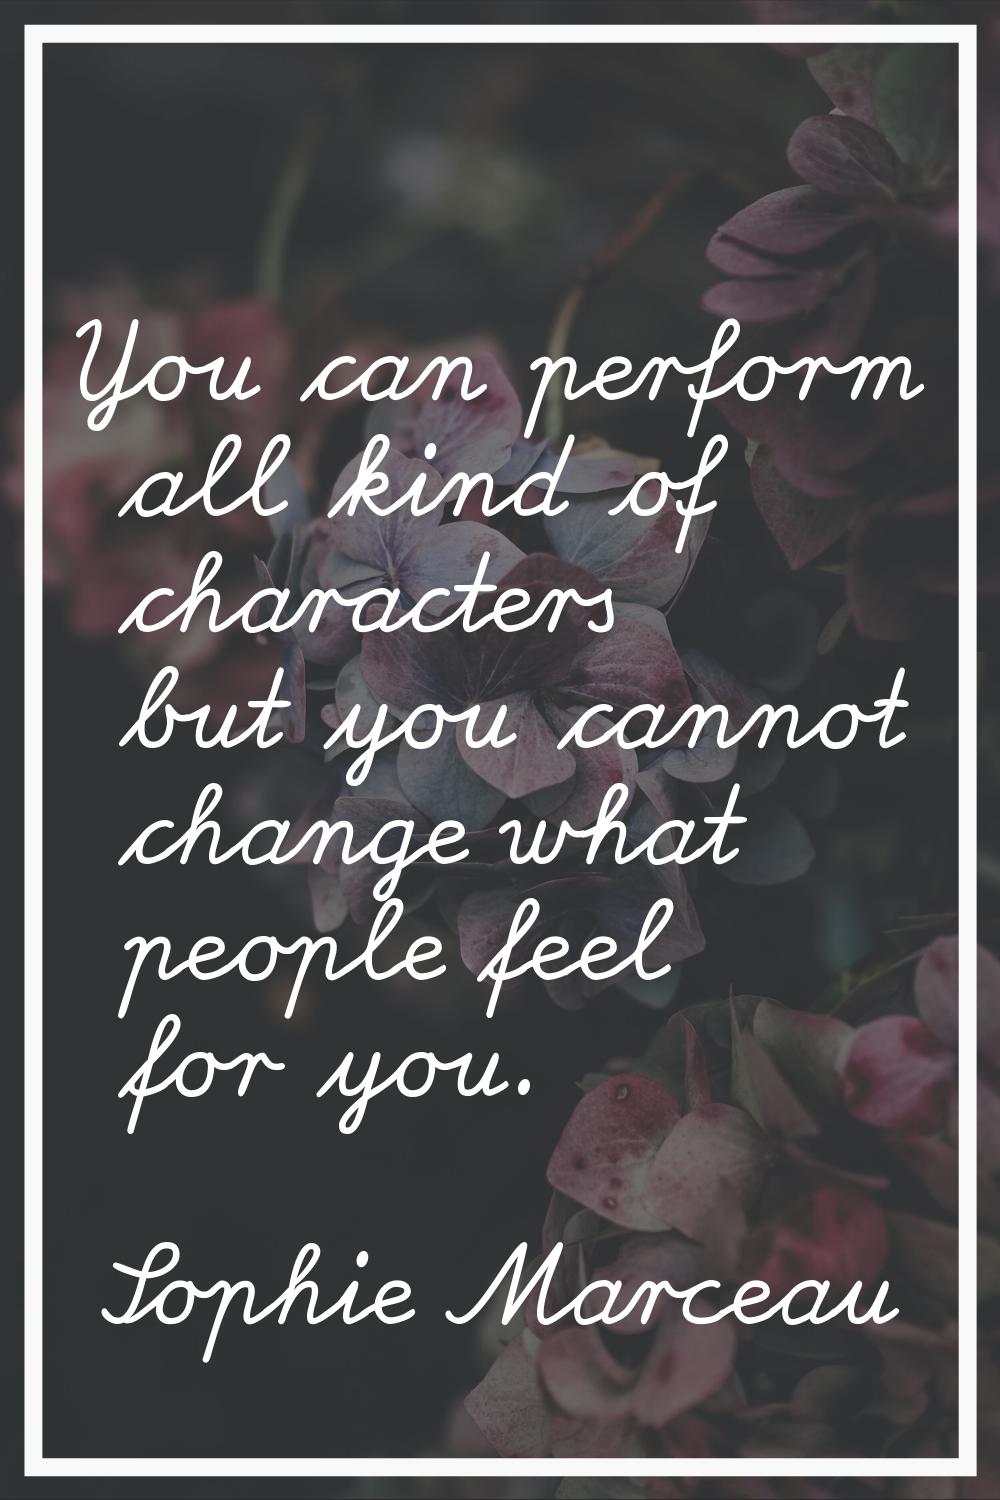 You can perform all kind of characters but you cannot change what people feel for you.